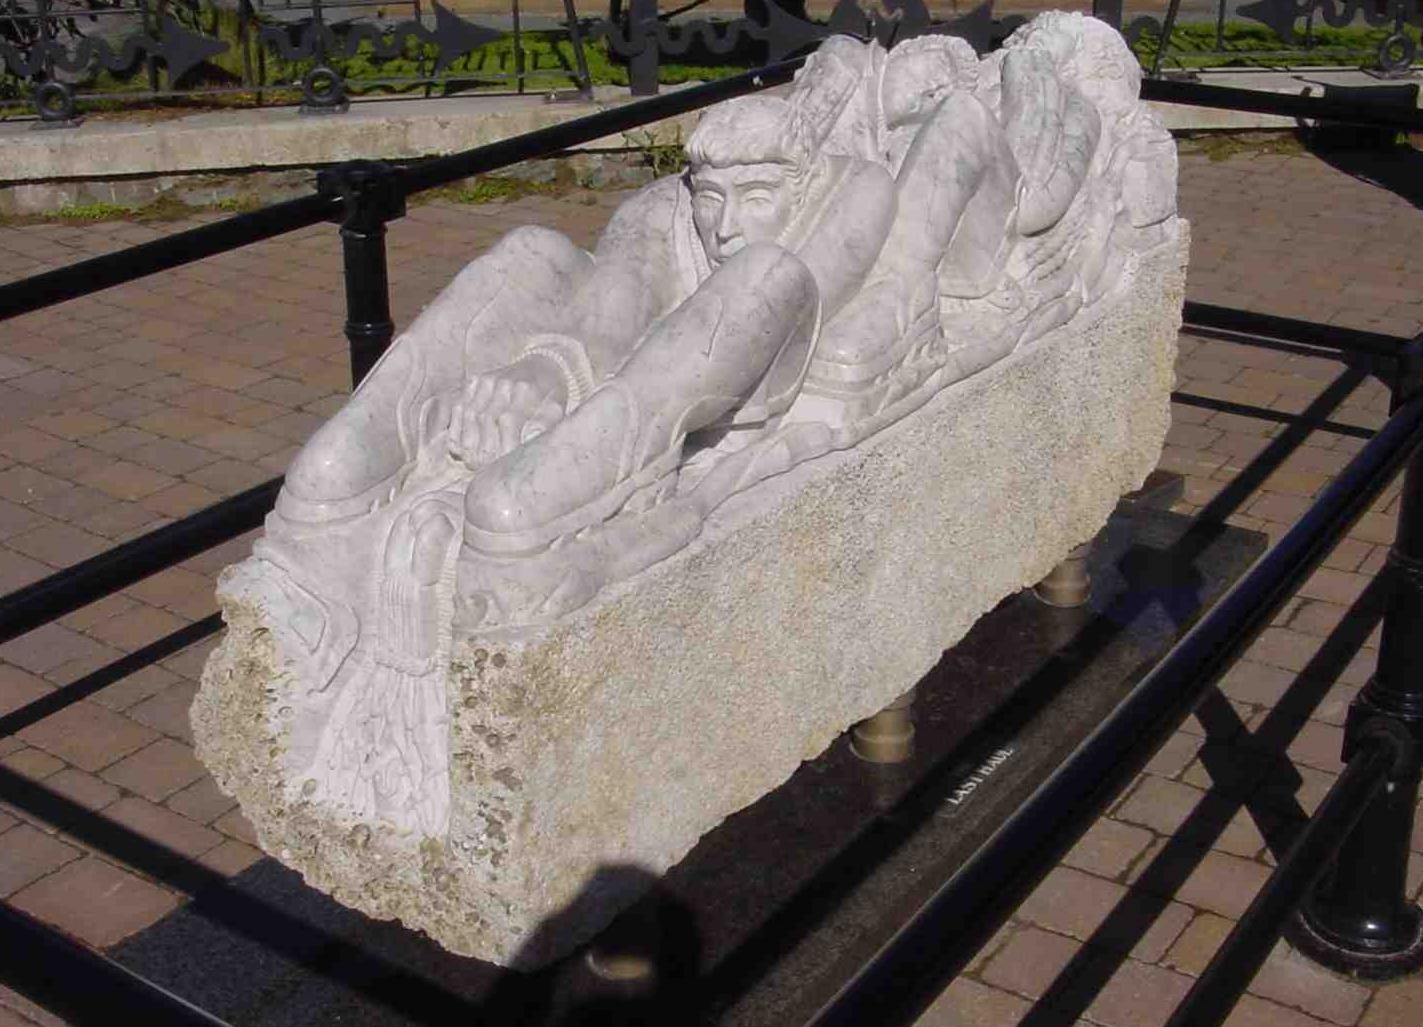 One of the blocks of marble that was recovered from the Tal-y-Bont site that has been carved and is now on display on the quayside in Barmouth